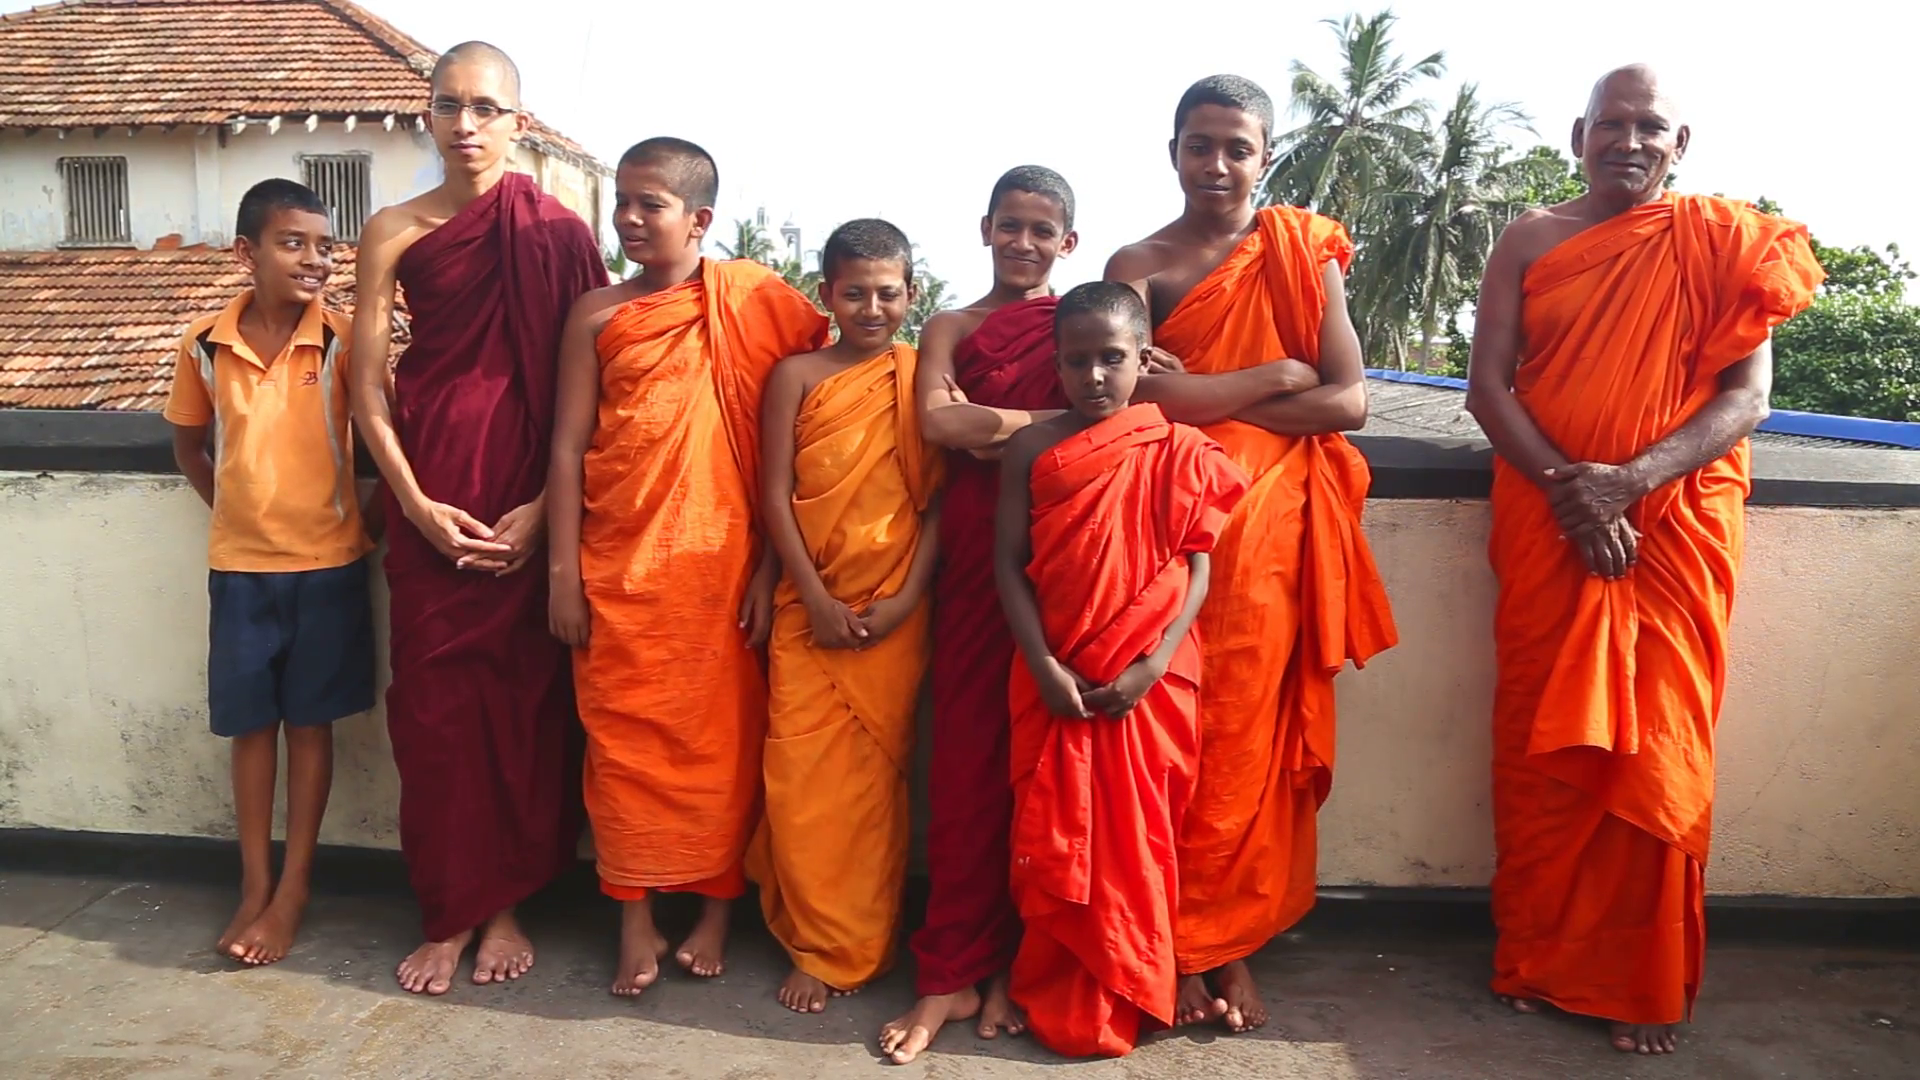 GALLE, SRI LANKA - MARCH 2014: The view of Buddhist monks in a ...